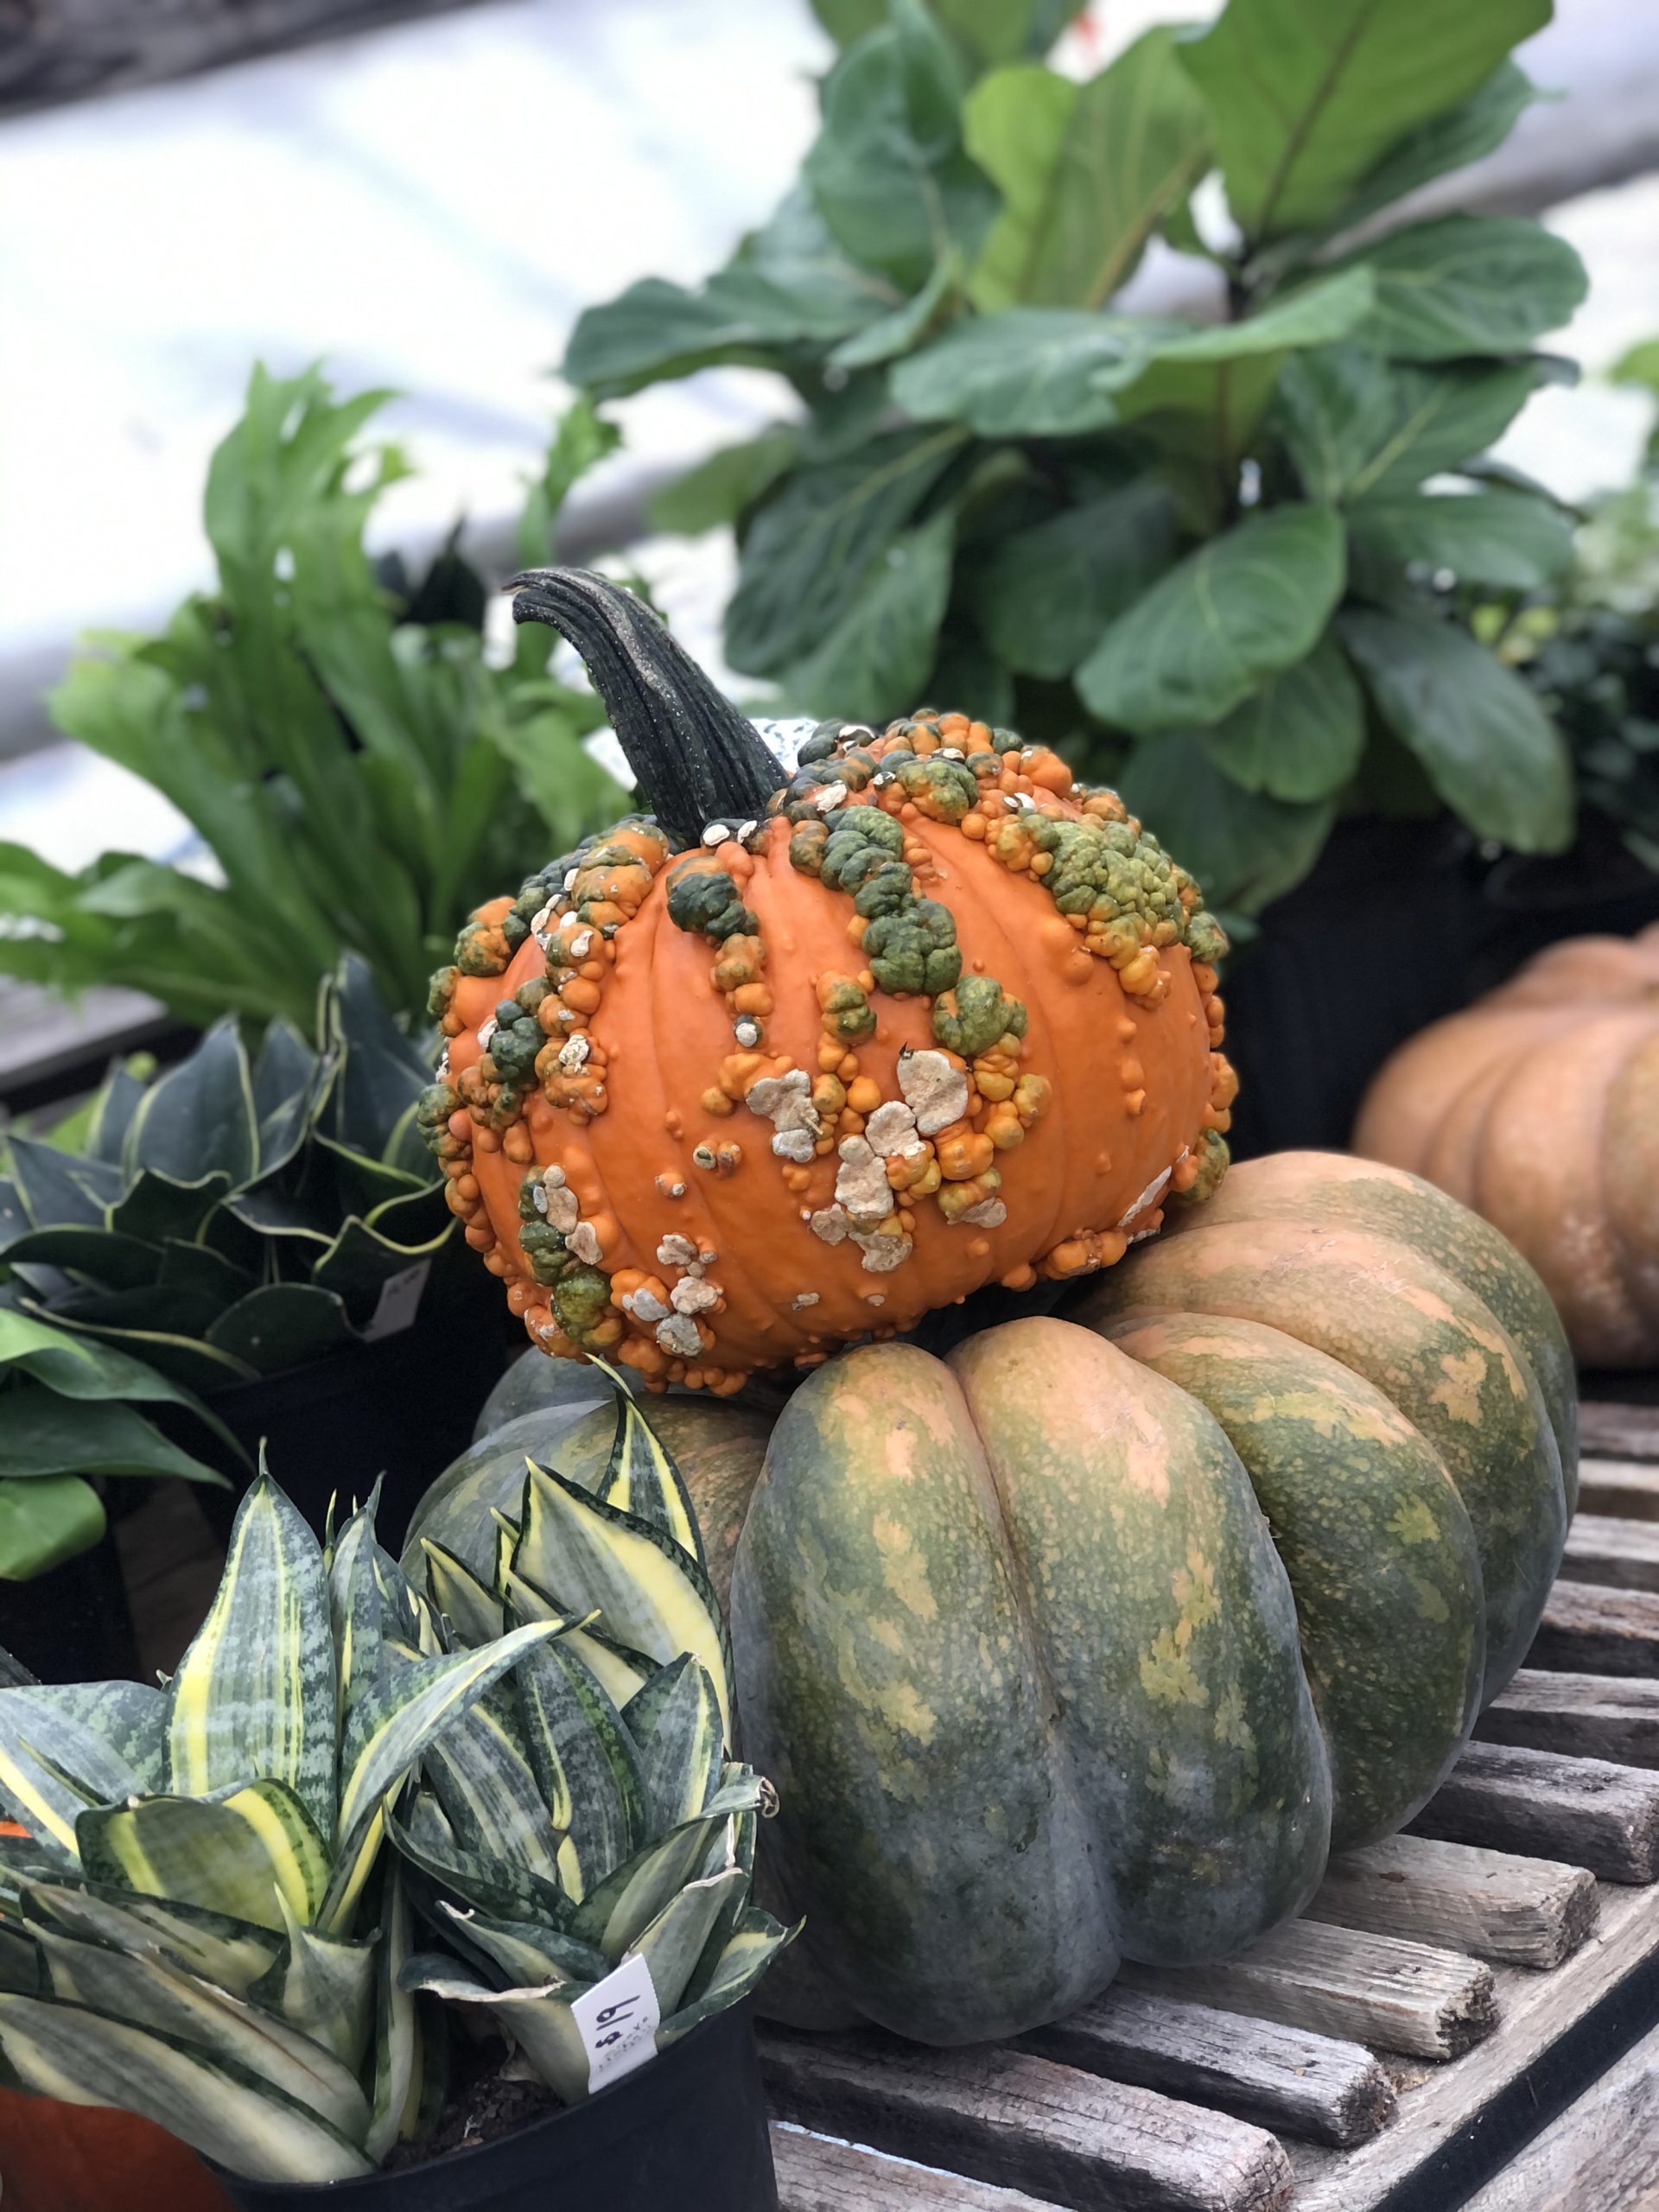 Small orange pumpkin sits on top of a green pumpkin on a bench surrounded by other plants and greenery.